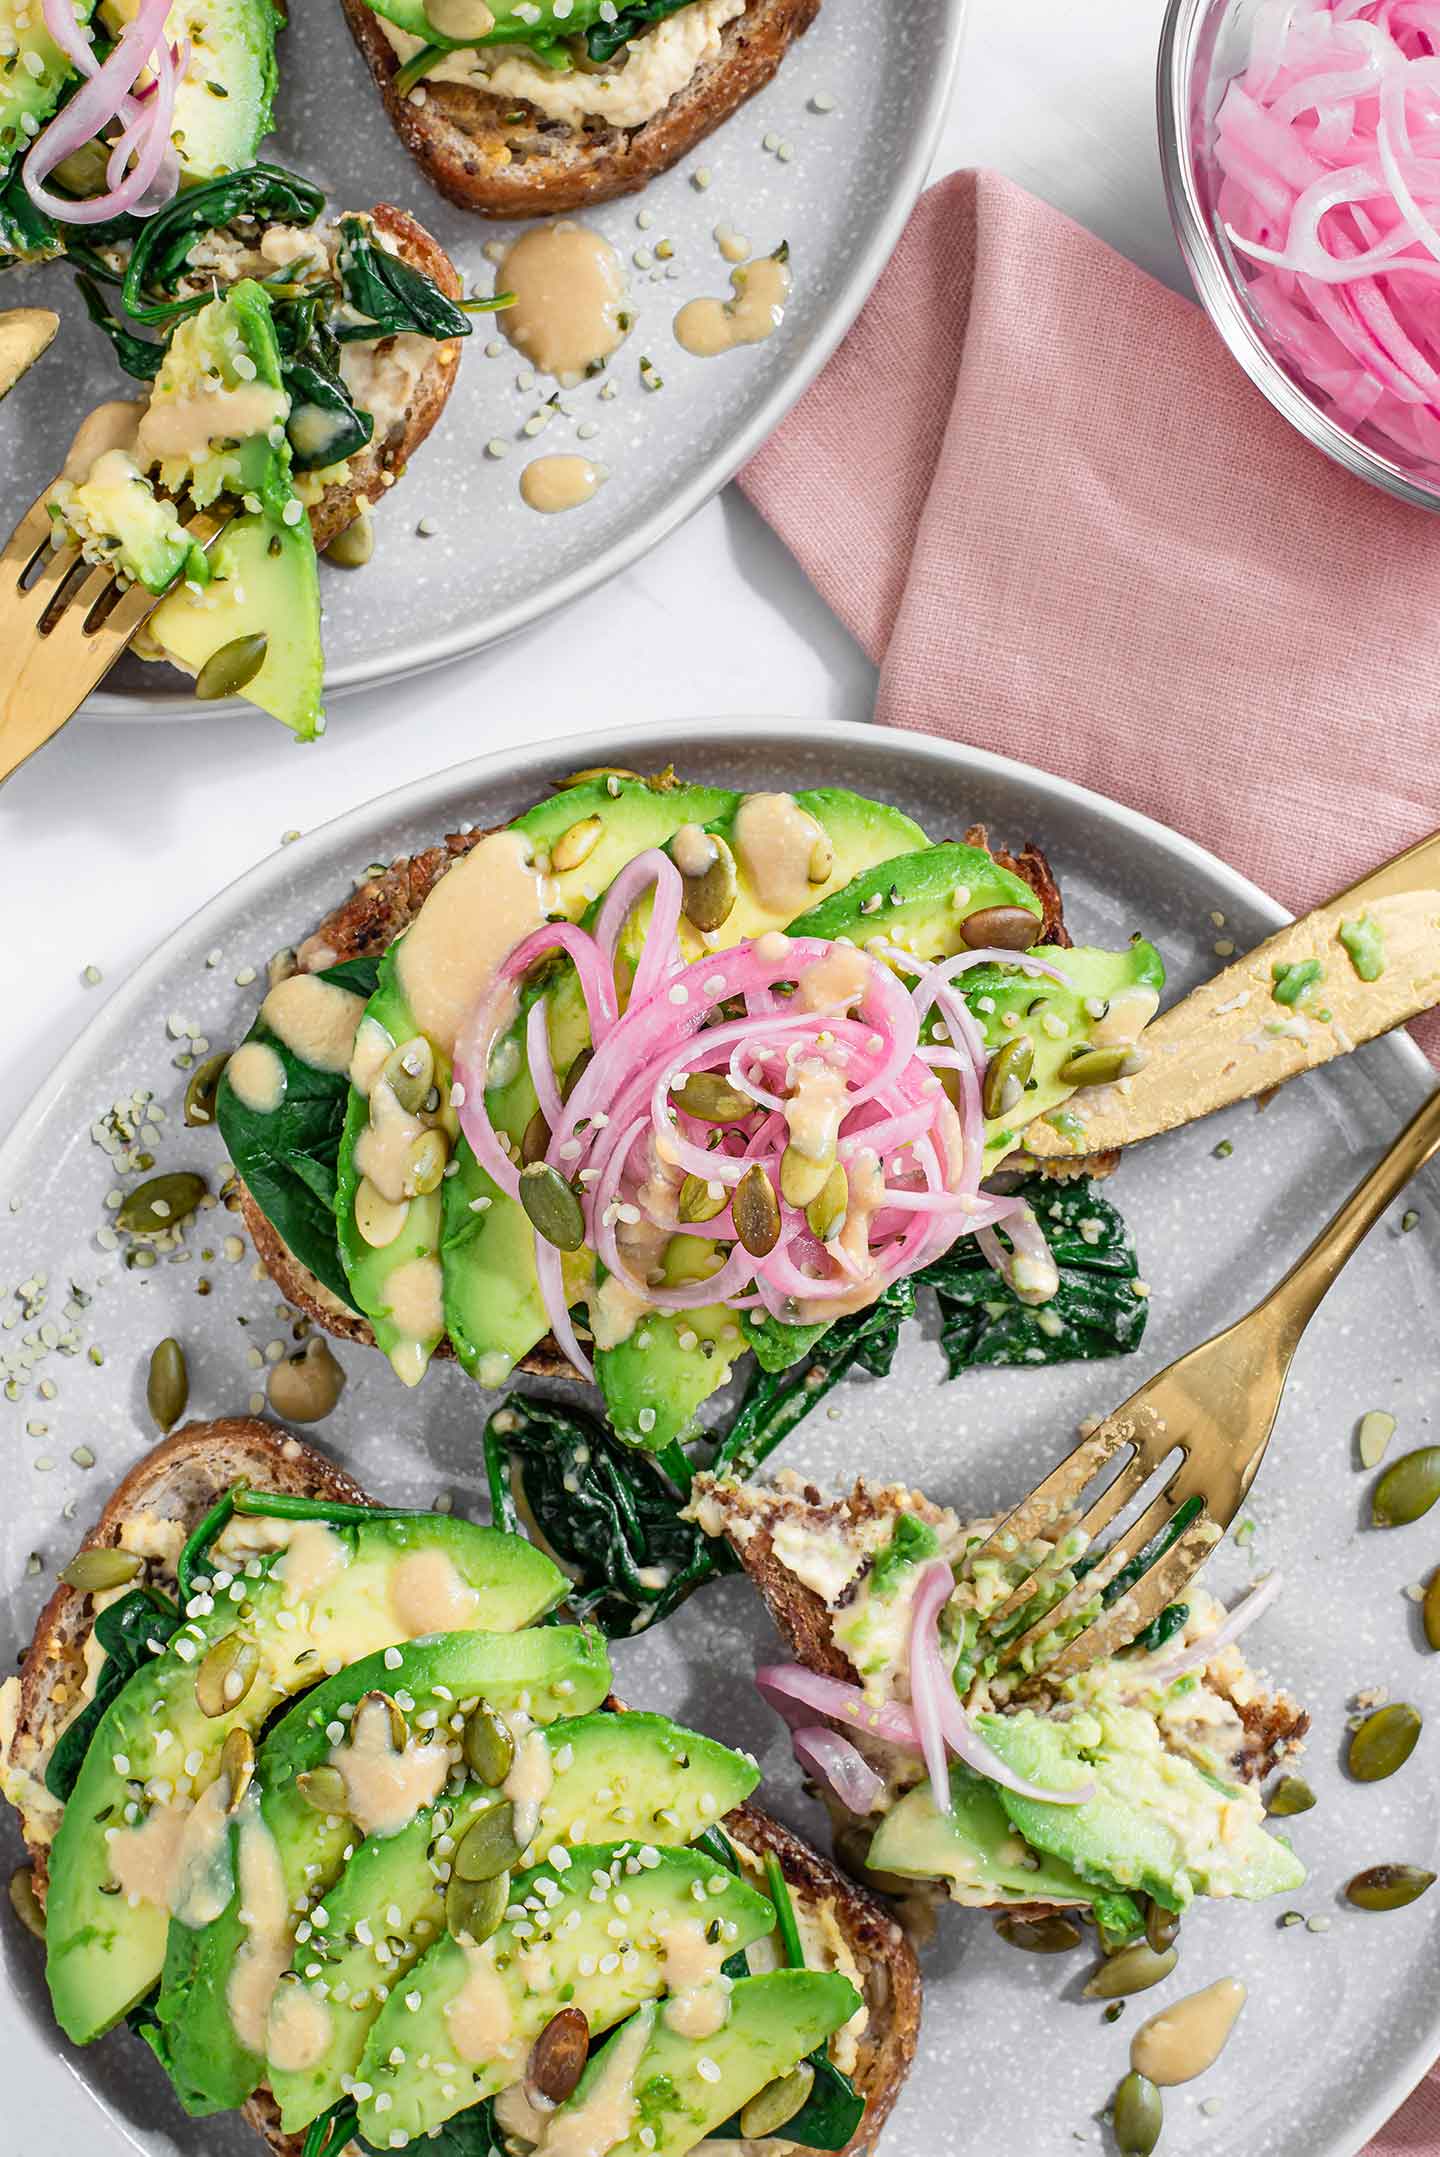 Top down view of two slices of miso avocado toast on a plate with a fork and knife digging in. The toast is topped with pickled red onion, seeds, and drizzled with miso glaze. Two more slices are on another plate.